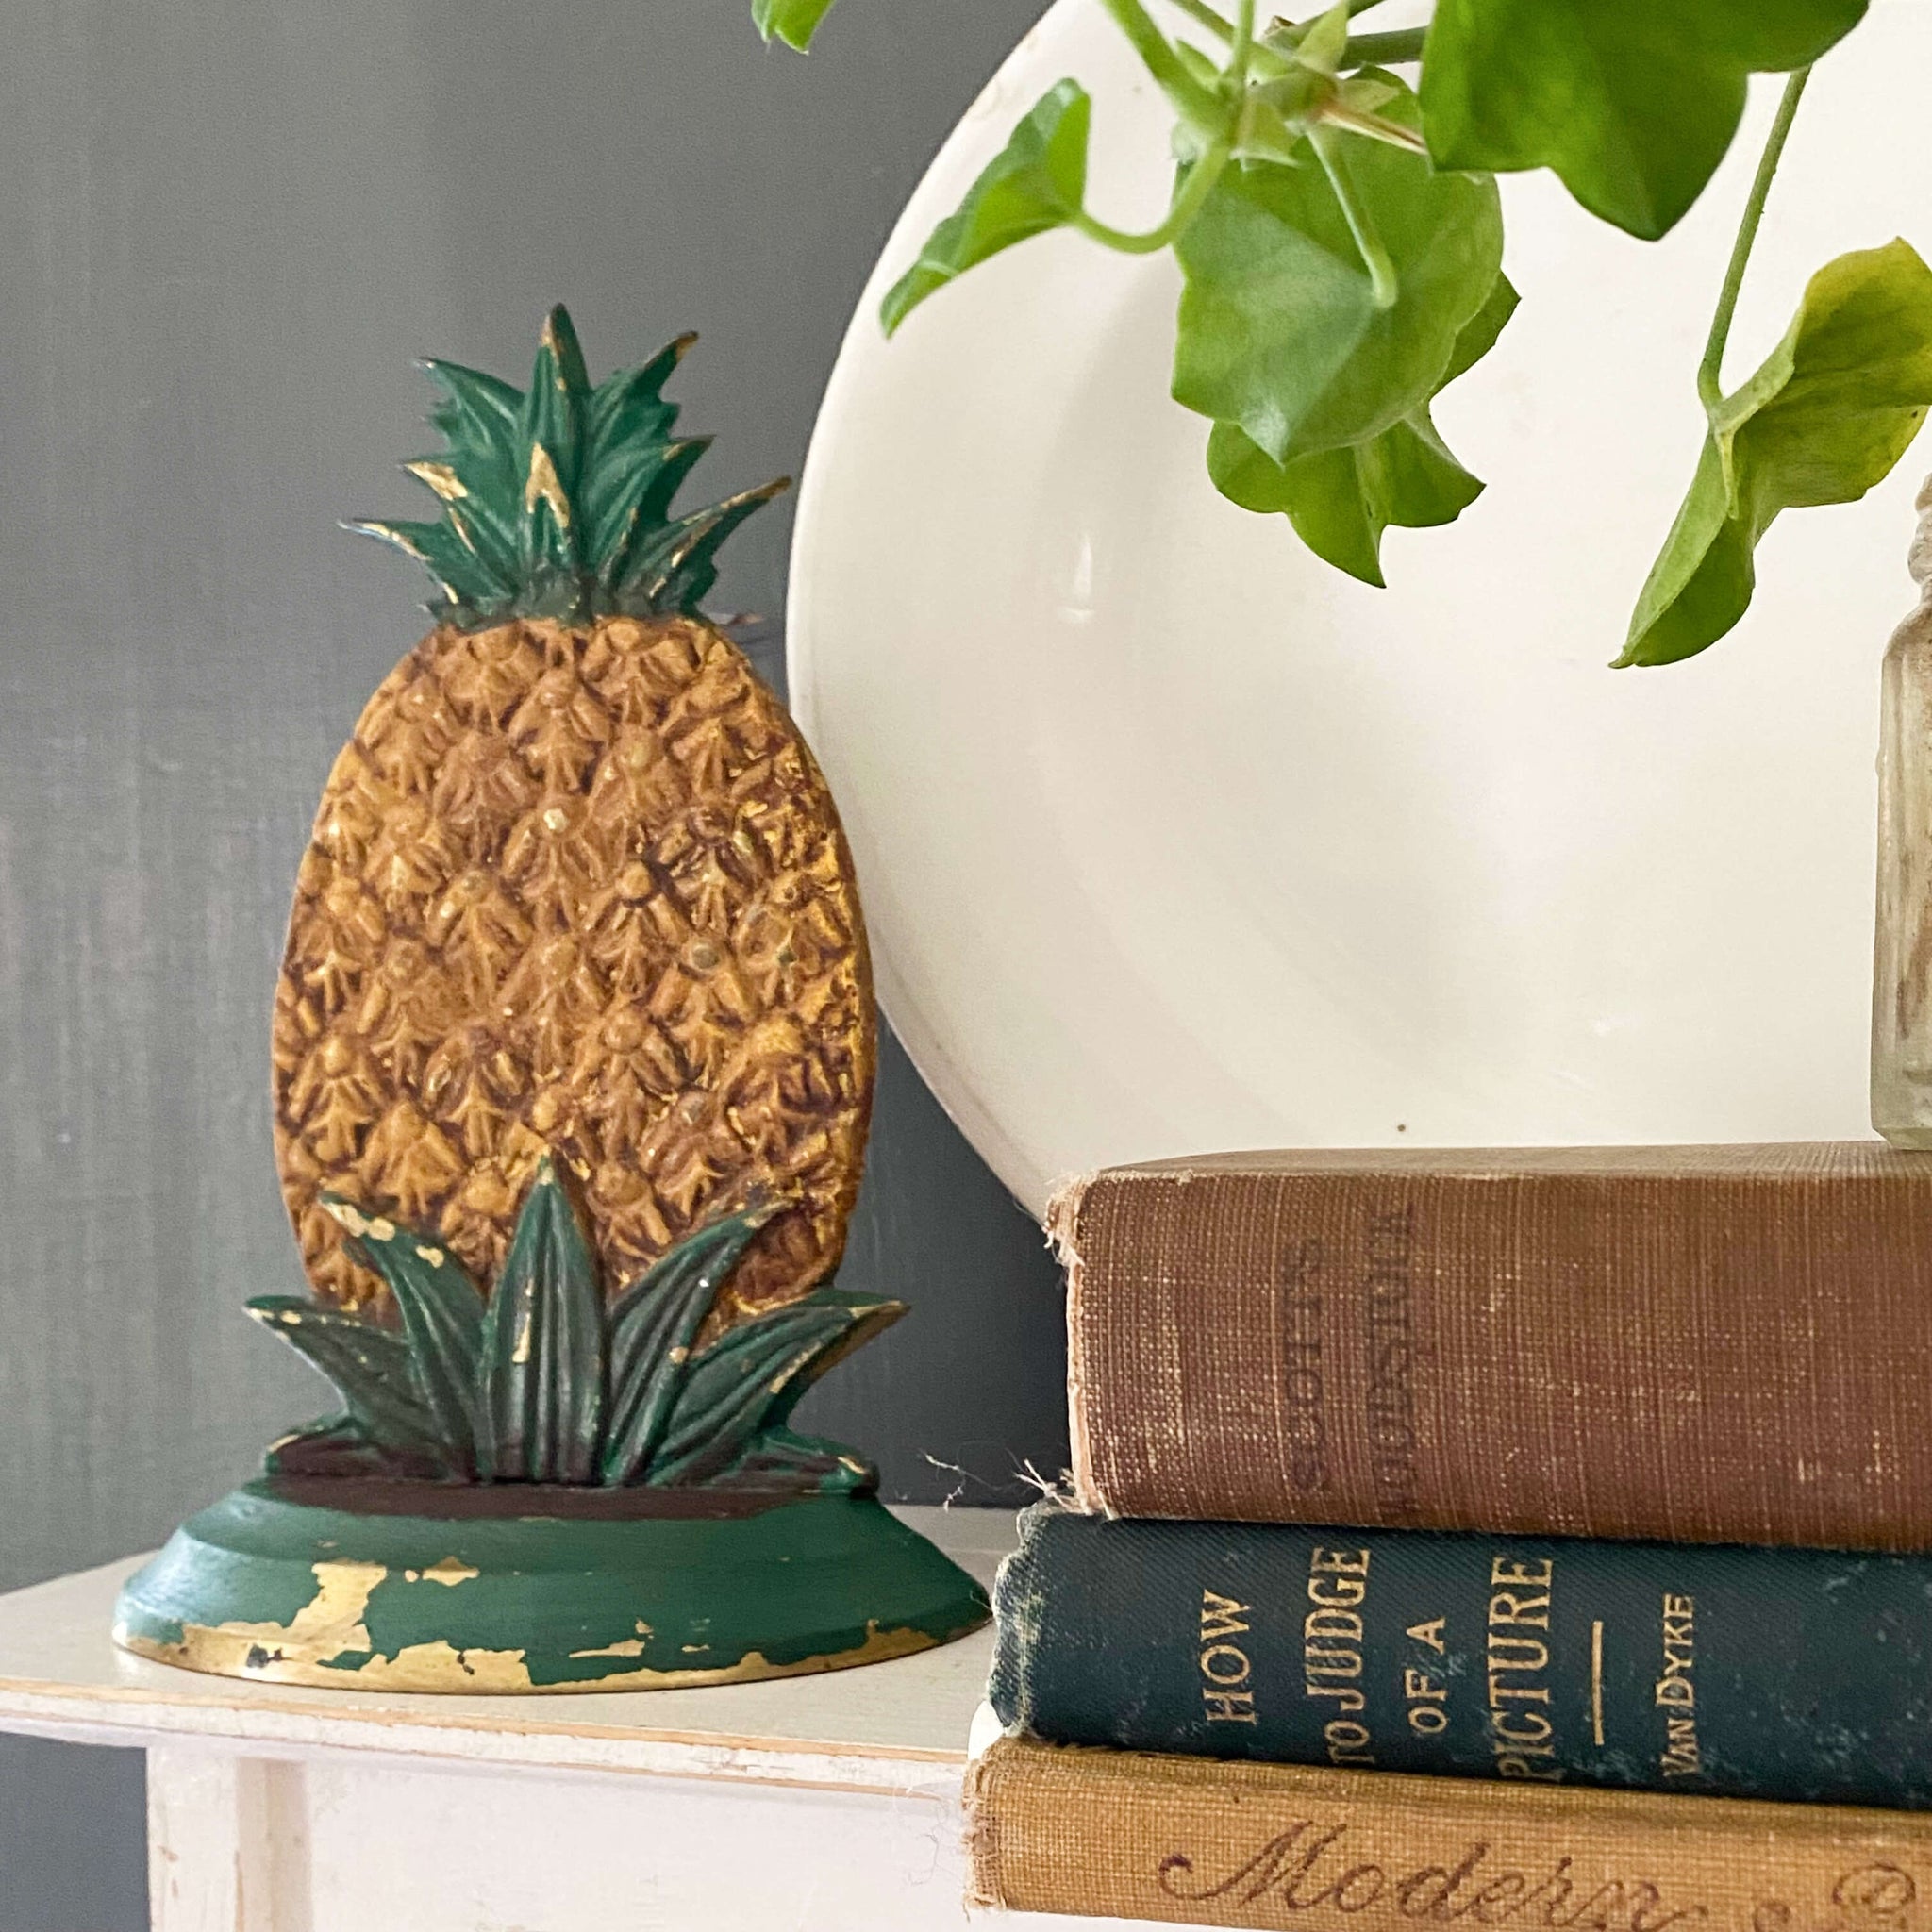 Vintage Pair of Handpainted Brass Pineapple Bookends by Yield House circa 1980s